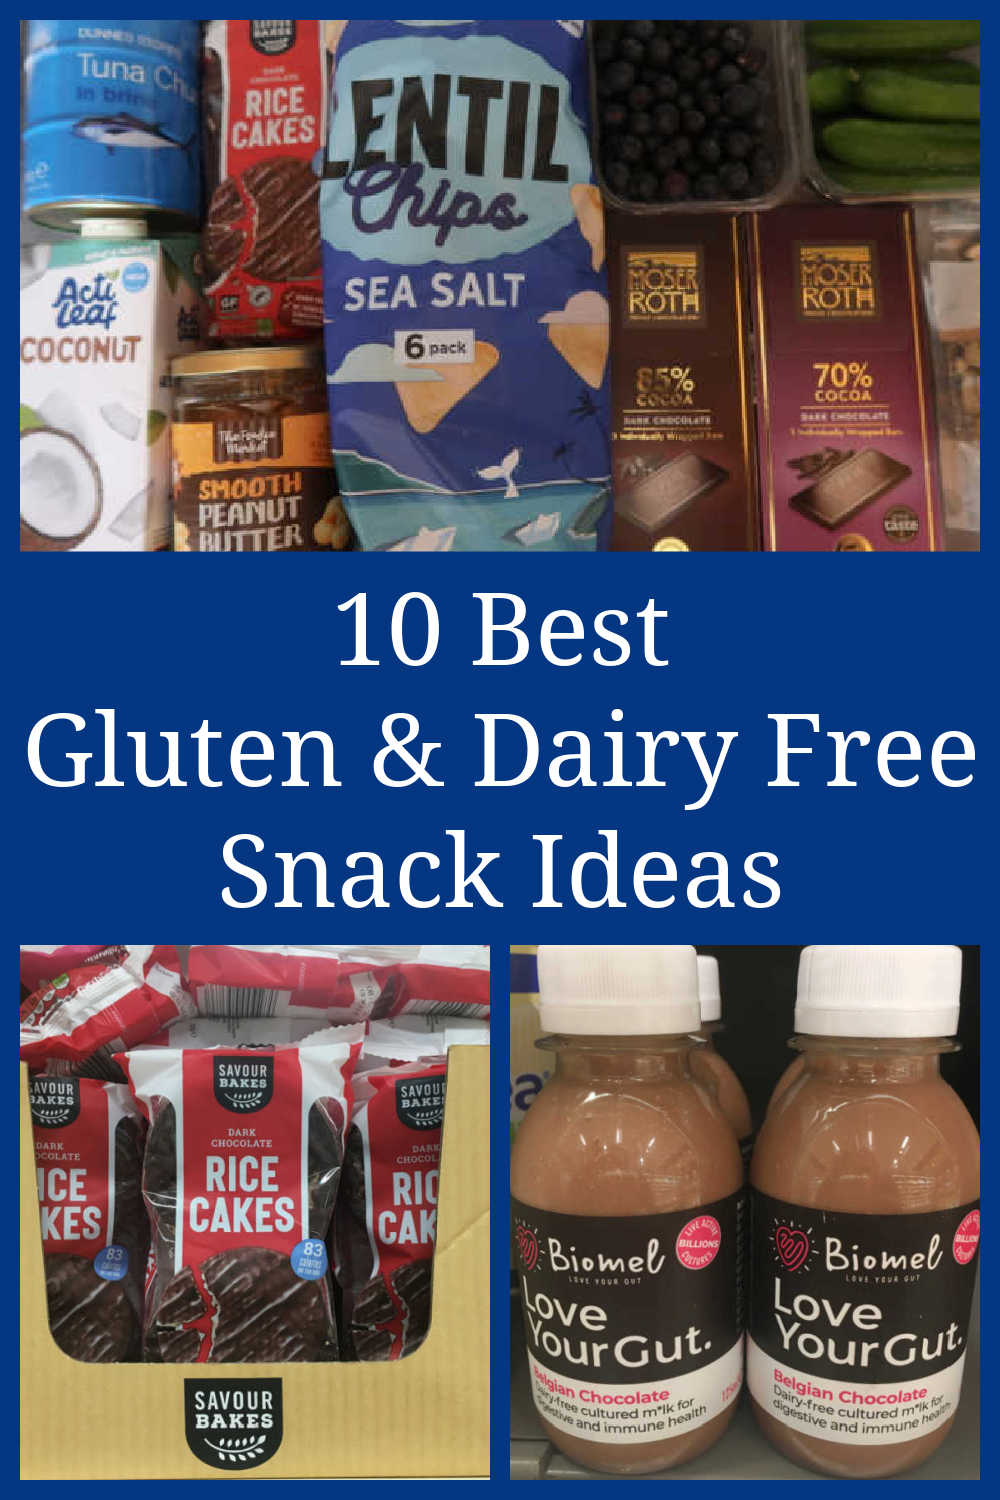 10 Gluten Free Dairy Free Snacks - Best Easy Snack Ideas - including healthy and delicious foods that are dairy-free and gluten-free.